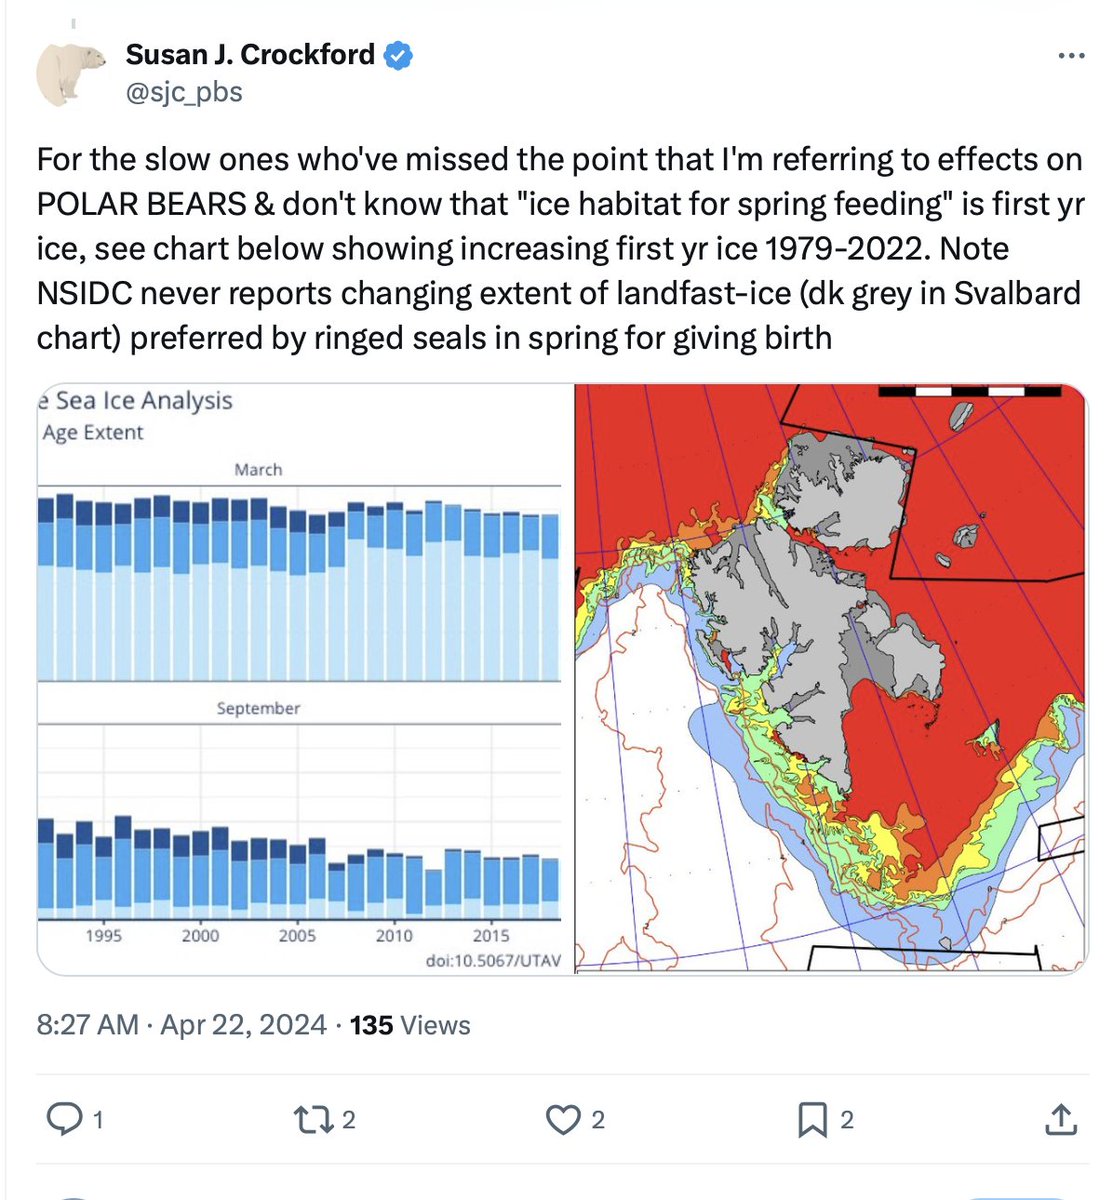 I was sent this armchair biologist 'insight'. More annual ice does nothing for polar bears if it's over water >200 m which much is: multiyear to annual ice over Polar Basin. Landfast ice isn't preferred by ringed seals => wrong. Very wrong in Hudson Bay with little landfast.